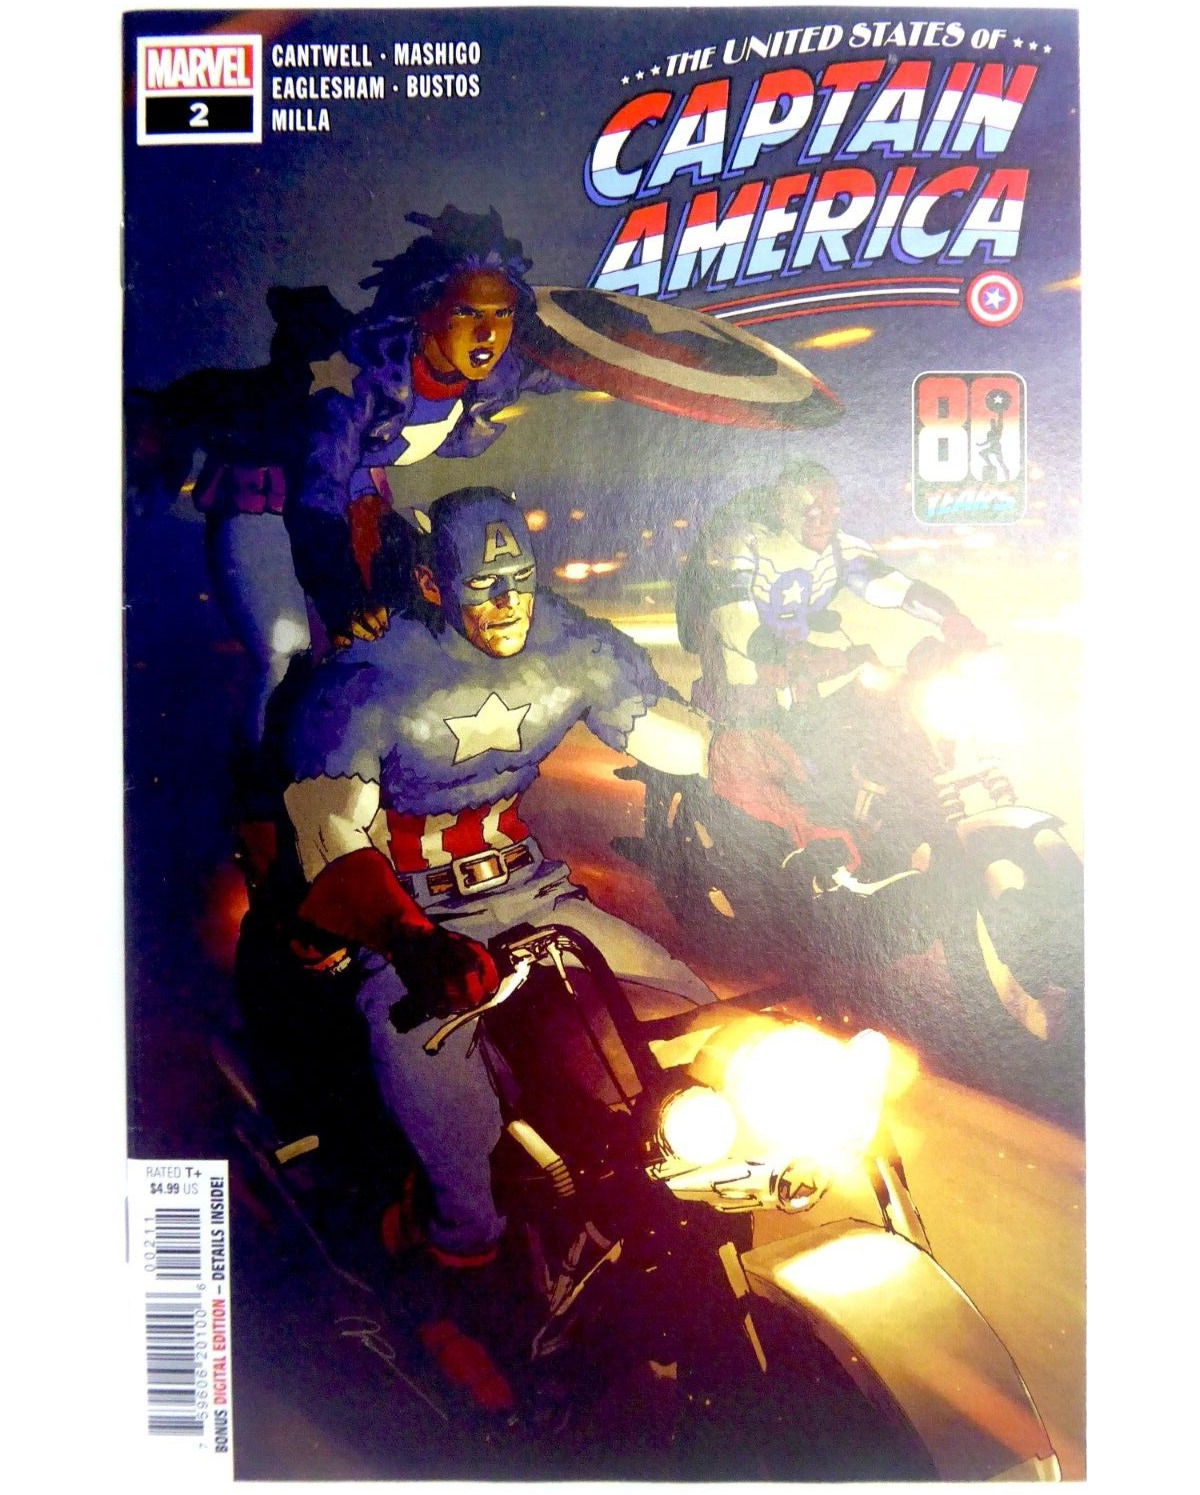 Marvel UNITED STATES OF CAPTAIN AMERICA (2021) #2 NM- (9.2) Ships Free